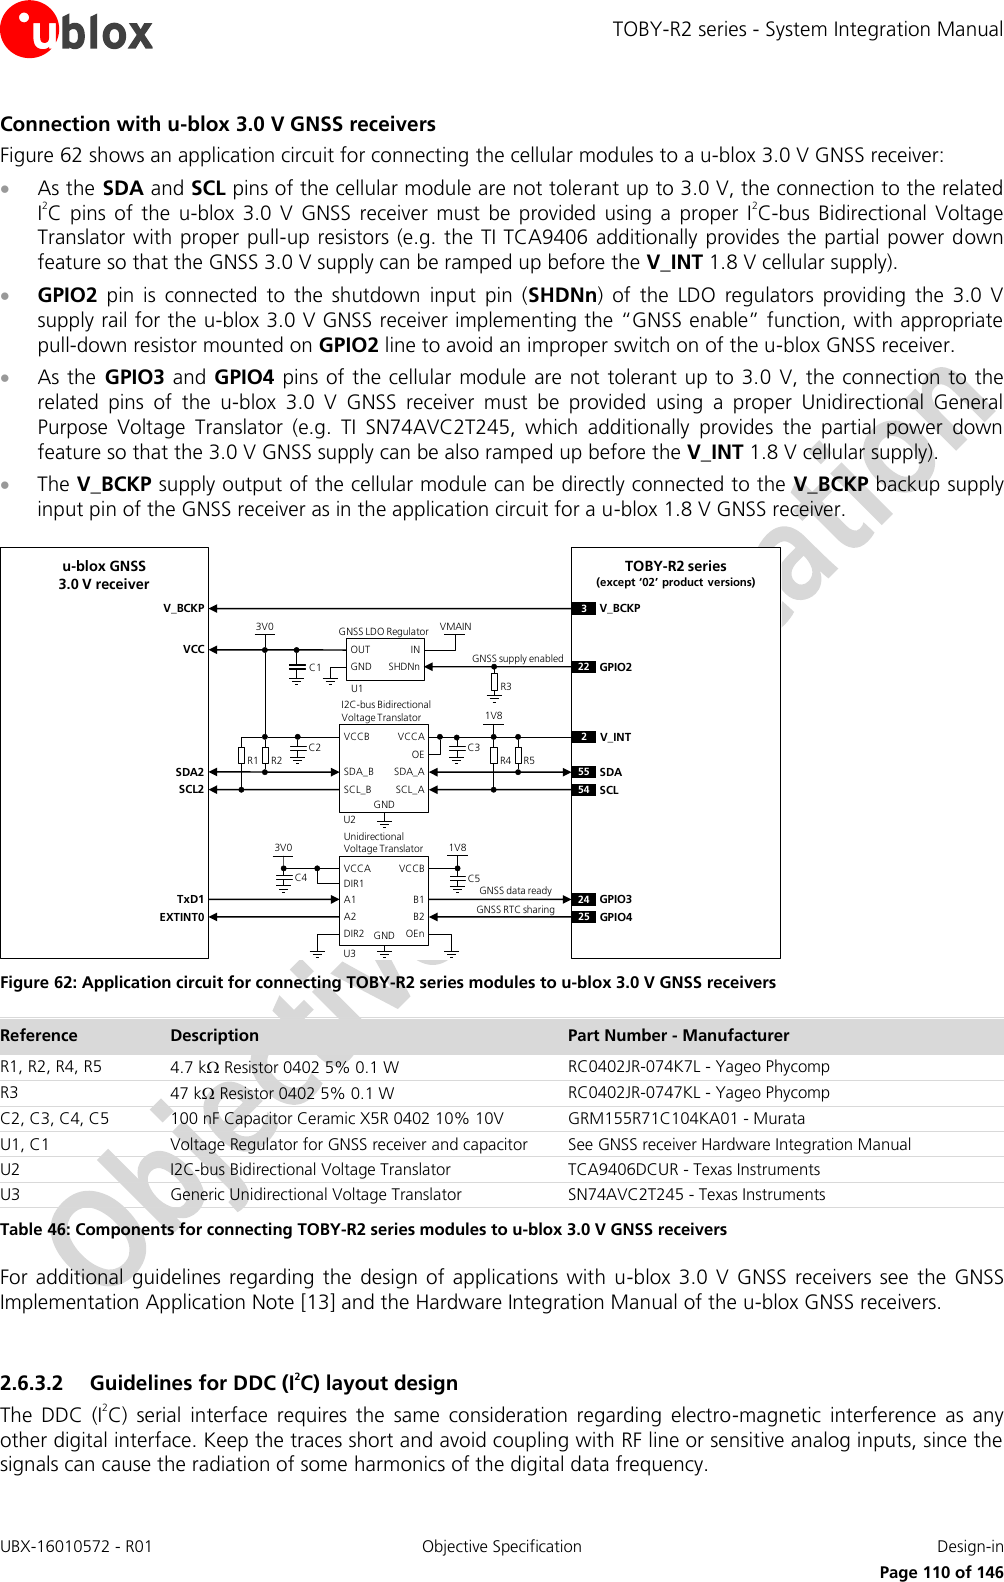 TOBY-R2 series - System Integration Manual UBX-16010572 - R01  Objective Specification  Design-in     Page 110 of 146 Connection with u-blox 3.0 V GNSS receivers Figure 62 shows an application circuit for connecting the cellular modules to a u-blox 3.0 V GNSS receiver:  As the SDA and SCL pins of the cellular module are not tolerant up to 3.0 V, the connection to the related I2C pins  of  the u-blox  3.0  V  GNSS  receiver  must  be  provided  using  a  proper  I2C-bus  Bidirectional  Voltage Translator with proper pull-up resistors (e.g. the TI TCA9406 additionally provides the partial power down feature so that the GNSS 3.0 V supply can be ramped up before the V_INT 1.8 V cellular supply).  GPIO2  pin  is  connected  to  the  shutdown  input  pin  (SHDNn)  of  the  LDO  regulators  providing  the  3.0  V supply rail for the u-blox 3.0 V GNSS receiver implementing the “GNSS enable” function, with appropriate pull-down resistor mounted on GPIO2 line to avoid an improper switch on of the u-blox GNSS receiver.  As the  GPIO3 and GPIO4 pins of the cellular module are not tolerant up to 3.0 V, the connection to the related  pins  of  the  u-blox  3.0  V  GNSS  receiver  must  be  provided  using  a  proper  Unidirectional  General Purpose  Voltage  Translator  (e.g.  TI  SN74AVC2T245,  which  additionally  provides  the  partial  power  down feature so that the 3.0 V GNSS supply can be also ramped up before the V_INT 1.8 V cellular supply).  The V_BCKP supply output of the cellular module can be directly connected to the V_BCKP backup supply input pin of the GNSS receiver as in the application circuit for a u-blox 1.8 V GNSS receiver. u-blox GNSS 3.0 V receiver24 GPIO31V8B1 A1GNDU3B2A2VCCBVCCAUnidirectionalVoltage TranslatorC4 C53V0TxD1R1INOUTGNSS LDO RegulatorSHDNnR2VMAIN3V0U122 GPIO255 SDA54 SCLR4 R51V8SDA_A SDA_BGNDU2SCL_ASCL_BVCCAVCCBI2C-bus Bidirectional Voltage Translator2V_INTC1C2 C3R3SDA2SCL2VCCDIR1DIR23V_BCKPV_BCKPOEnOEGNSS data readyGNSS supply enabledGNDTOBY-R2 series(except ‘02’ product versions)EXTINT0 GPIO425GNSS RTC sharing Figure 62: Application circuit for connecting TOBY-R2 series modules to u-blox 3.0 V GNSS receivers Reference Description Part Number - Manufacturer R1, R2, R4, R5 4.7 k Resistor 0402 5% 0.1 W  RC0402JR-074K7L - Yageo Phycomp R3 47 k Resistor 0402 5% 0.1 W  RC0402JR-0747KL - Yageo Phycomp C2, C3, C4, C5 100 nF Capacitor Ceramic X5R 0402 10% 10V GRM155R71C104KA01 - Murata U1, C1 Voltage Regulator for GNSS receiver and capacitor  See GNSS receiver Hardware Integration Manual U2 I2C-bus Bidirectional Voltage Translator TCA9406DCUR - Texas Instruments U3 Generic Unidirectional Voltage Translator SN74AVC2T245 - Texas Instruments Table 46: Components for connecting TOBY-R2 series modules to u-blox 3.0 V GNSS receivers For additional  guidelines regarding the  design of applications  with  u-blox 3.0  V GNSS  receivers  see  the  GNSS Implementation Application Note [13] and the Hardware Integration Manual of the u-blox GNSS receivers.  2.6.3.2 Guidelines for DDC (I2C) layout design The  DDC  (I2C)  serial  interface  requires  the  same  consideration  regarding  electro-magnetic  interference  as  any other digital interface. Keep the traces short and avoid coupling with RF line or sensitive analog inputs, since the signals can cause the radiation of some harmonics of the digital data frequency. 